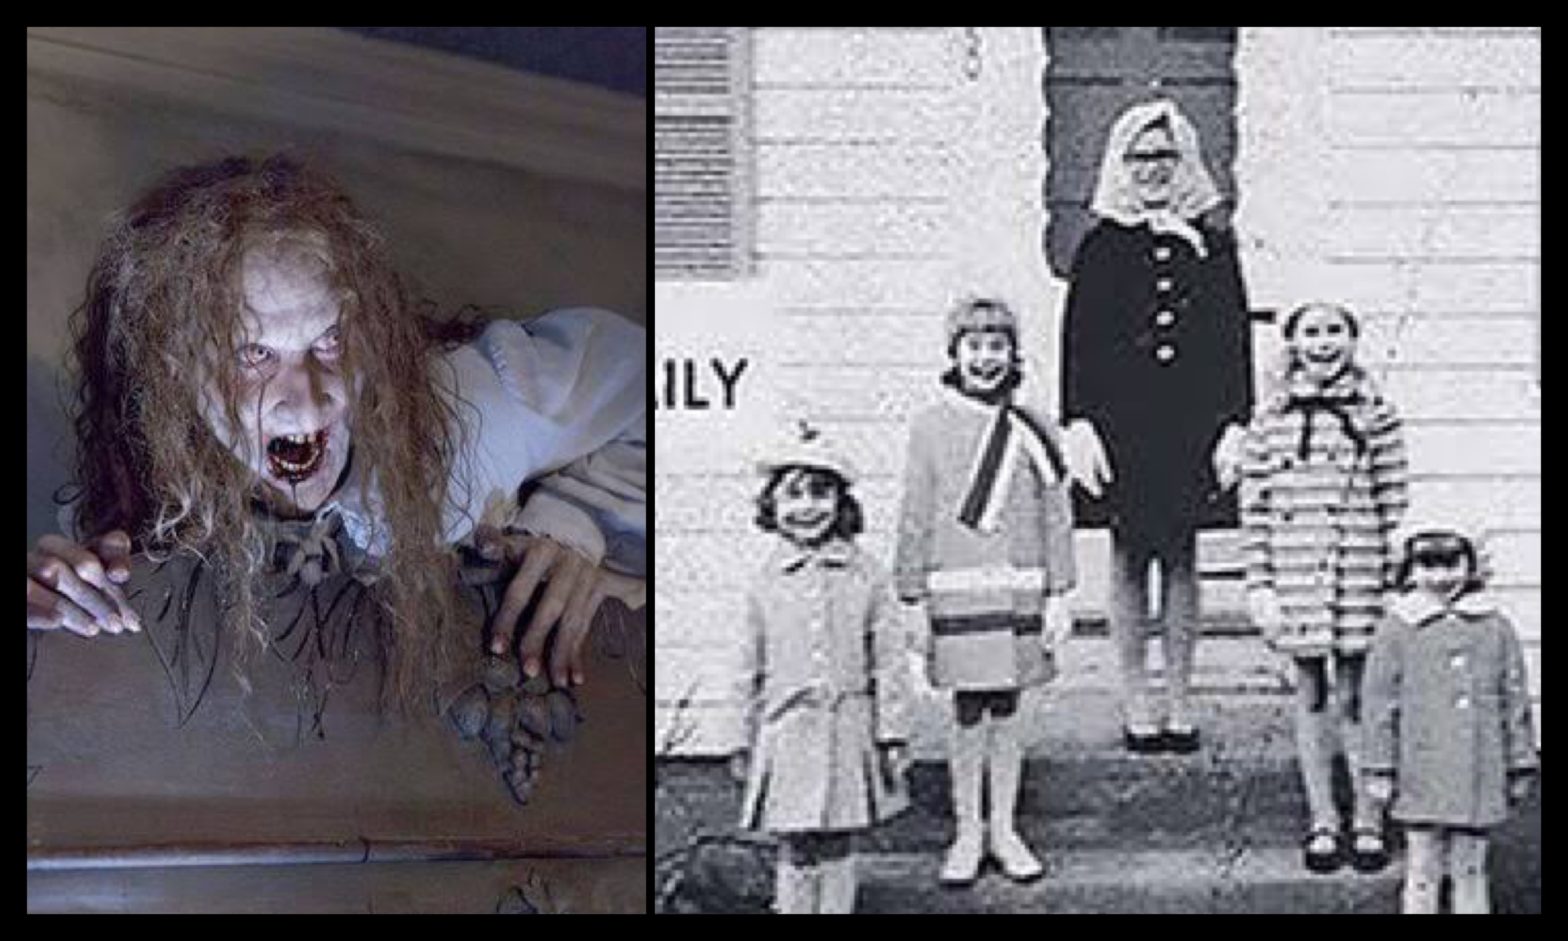 The Conjuring, the real people from the real story